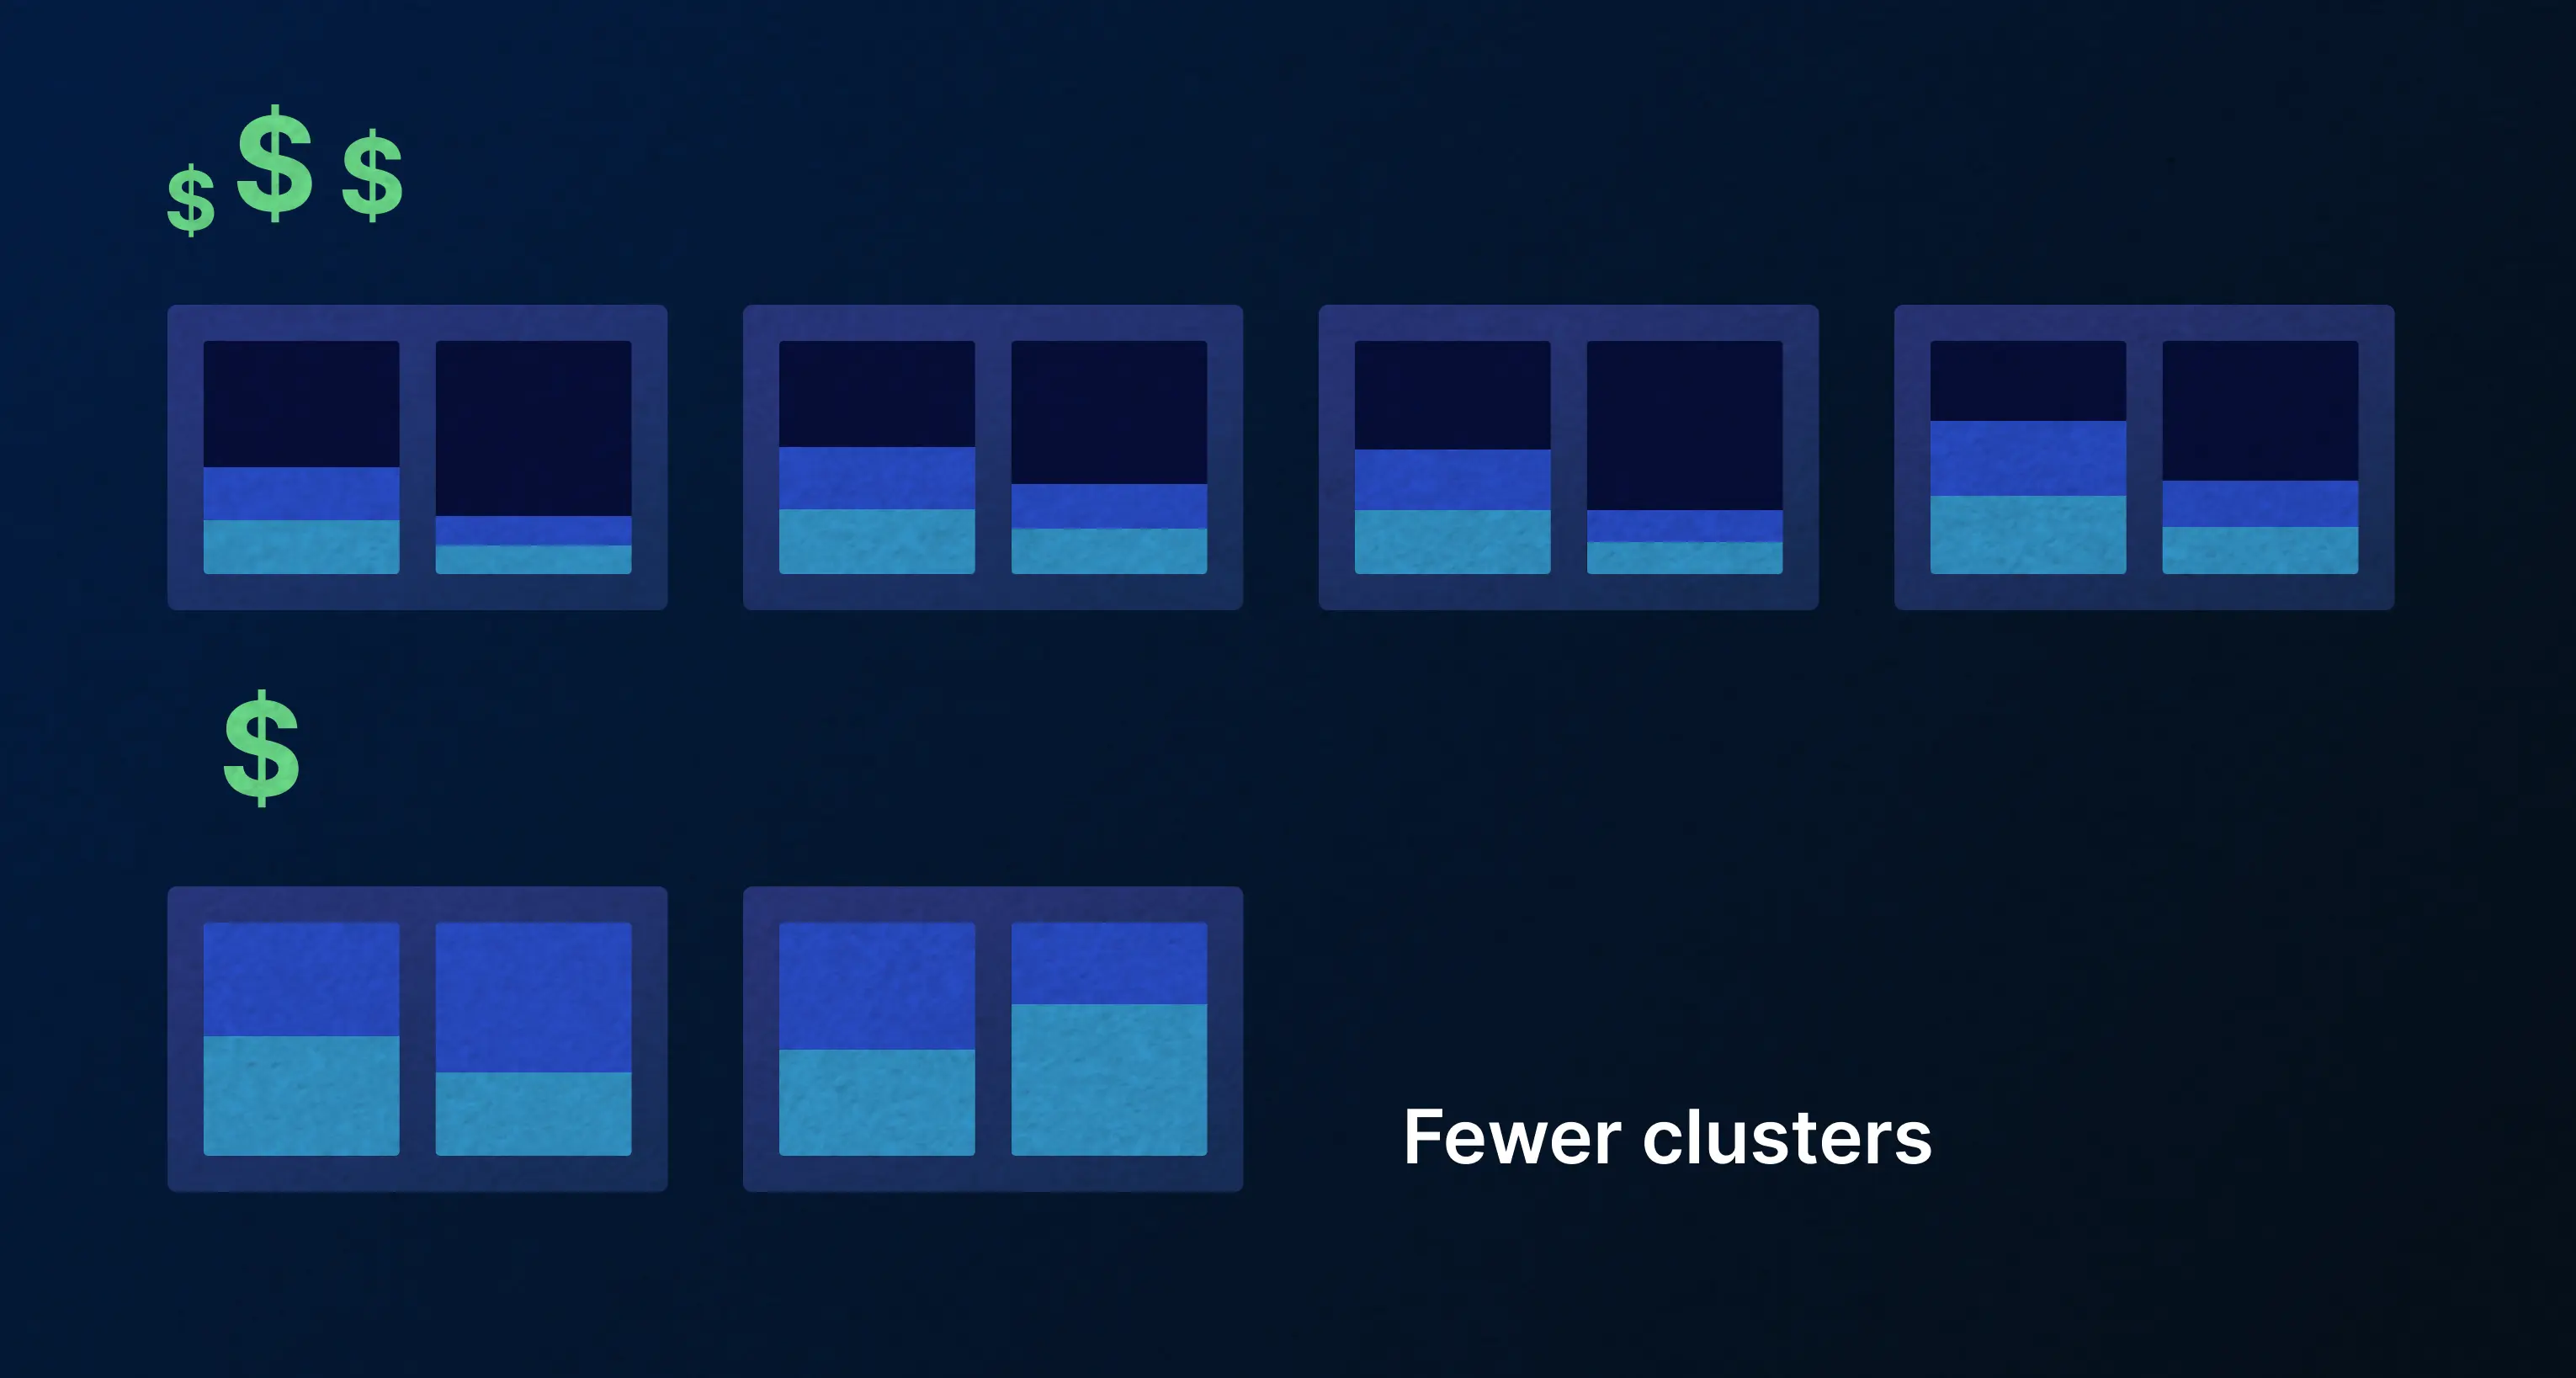 Fewer clusters